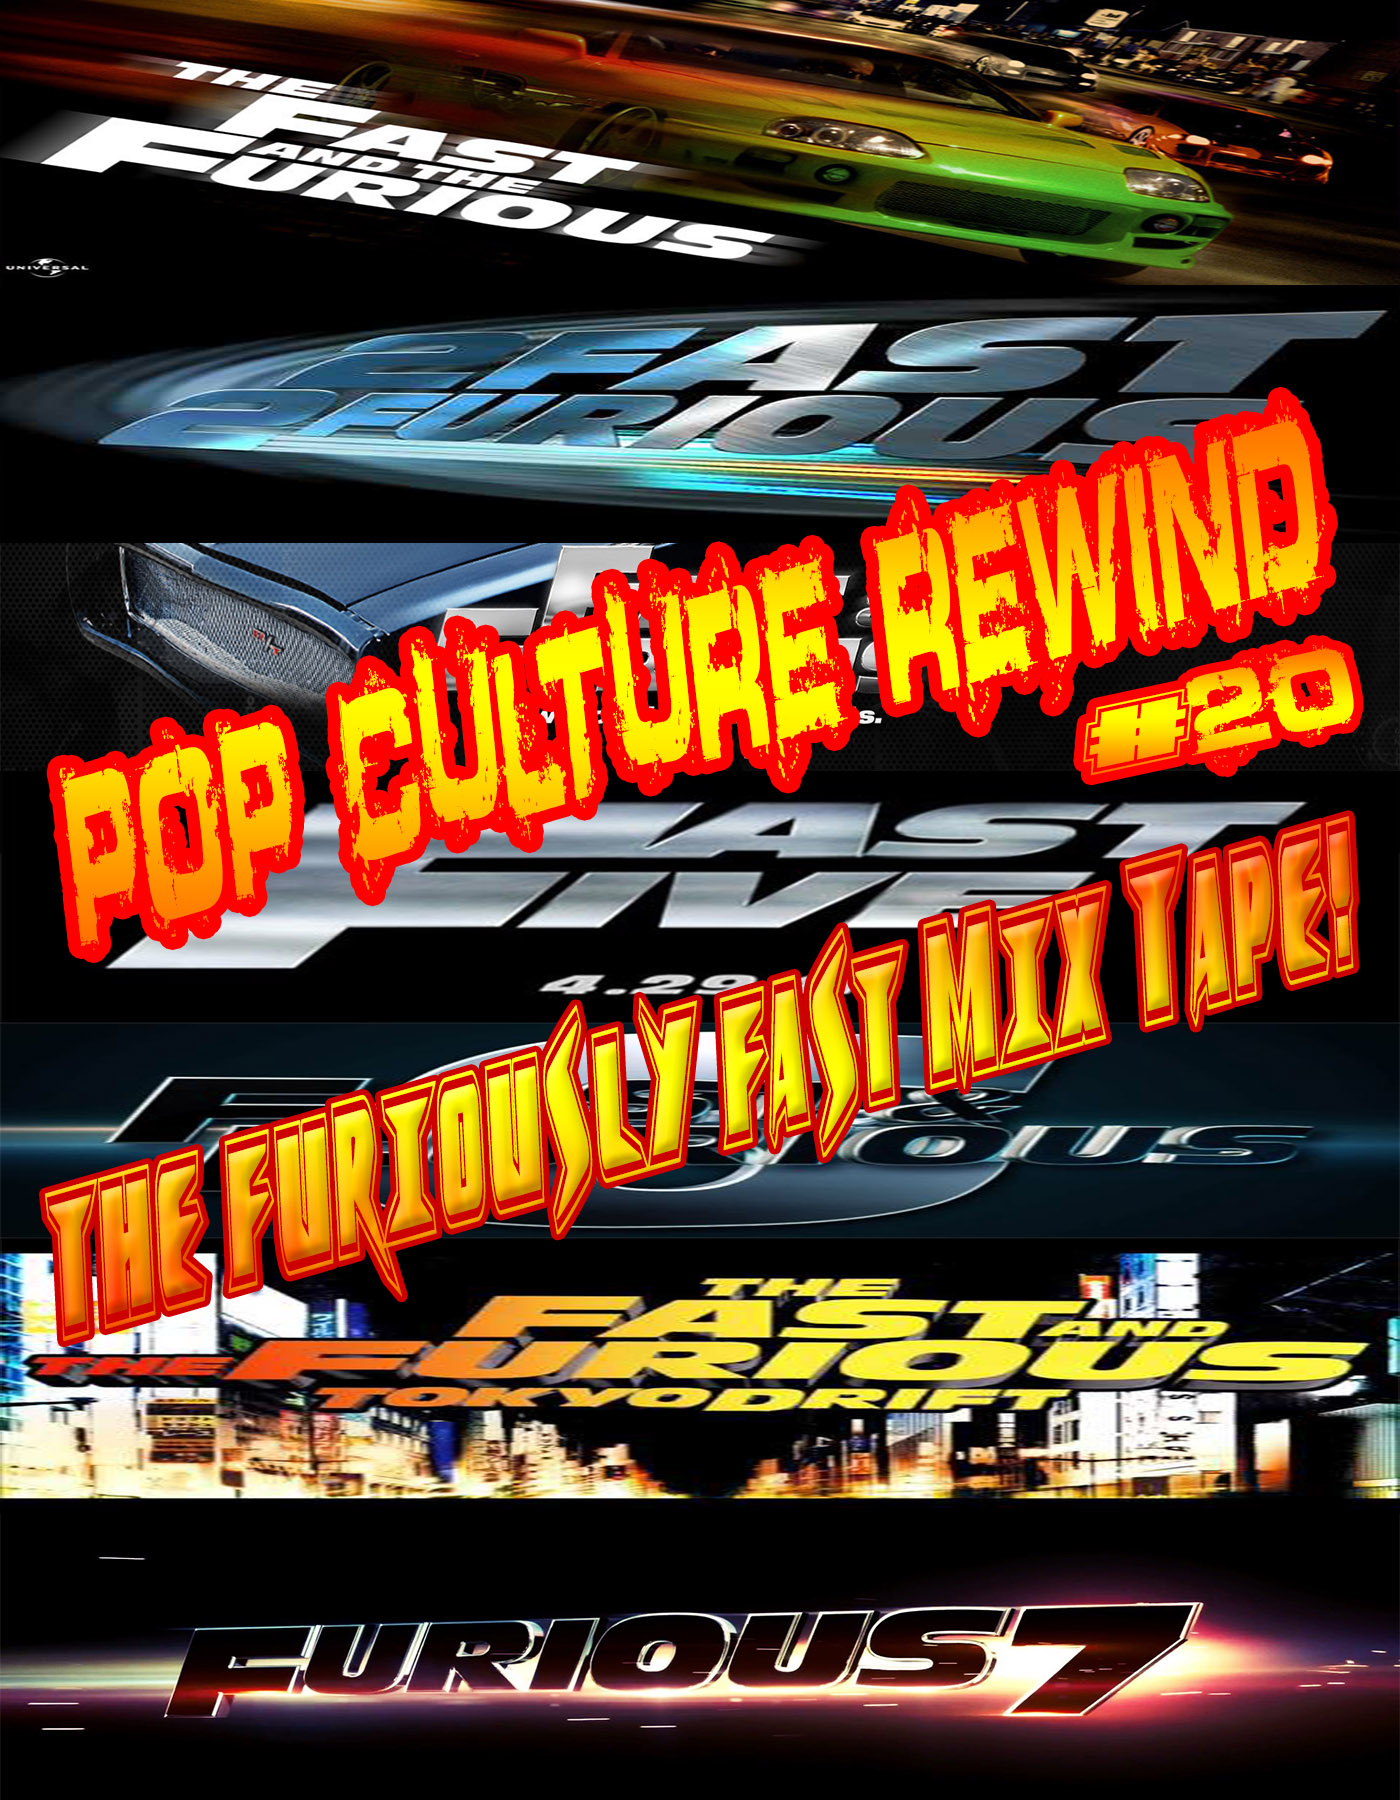 PCR #20 - The Furiously Fast Mix Tape!